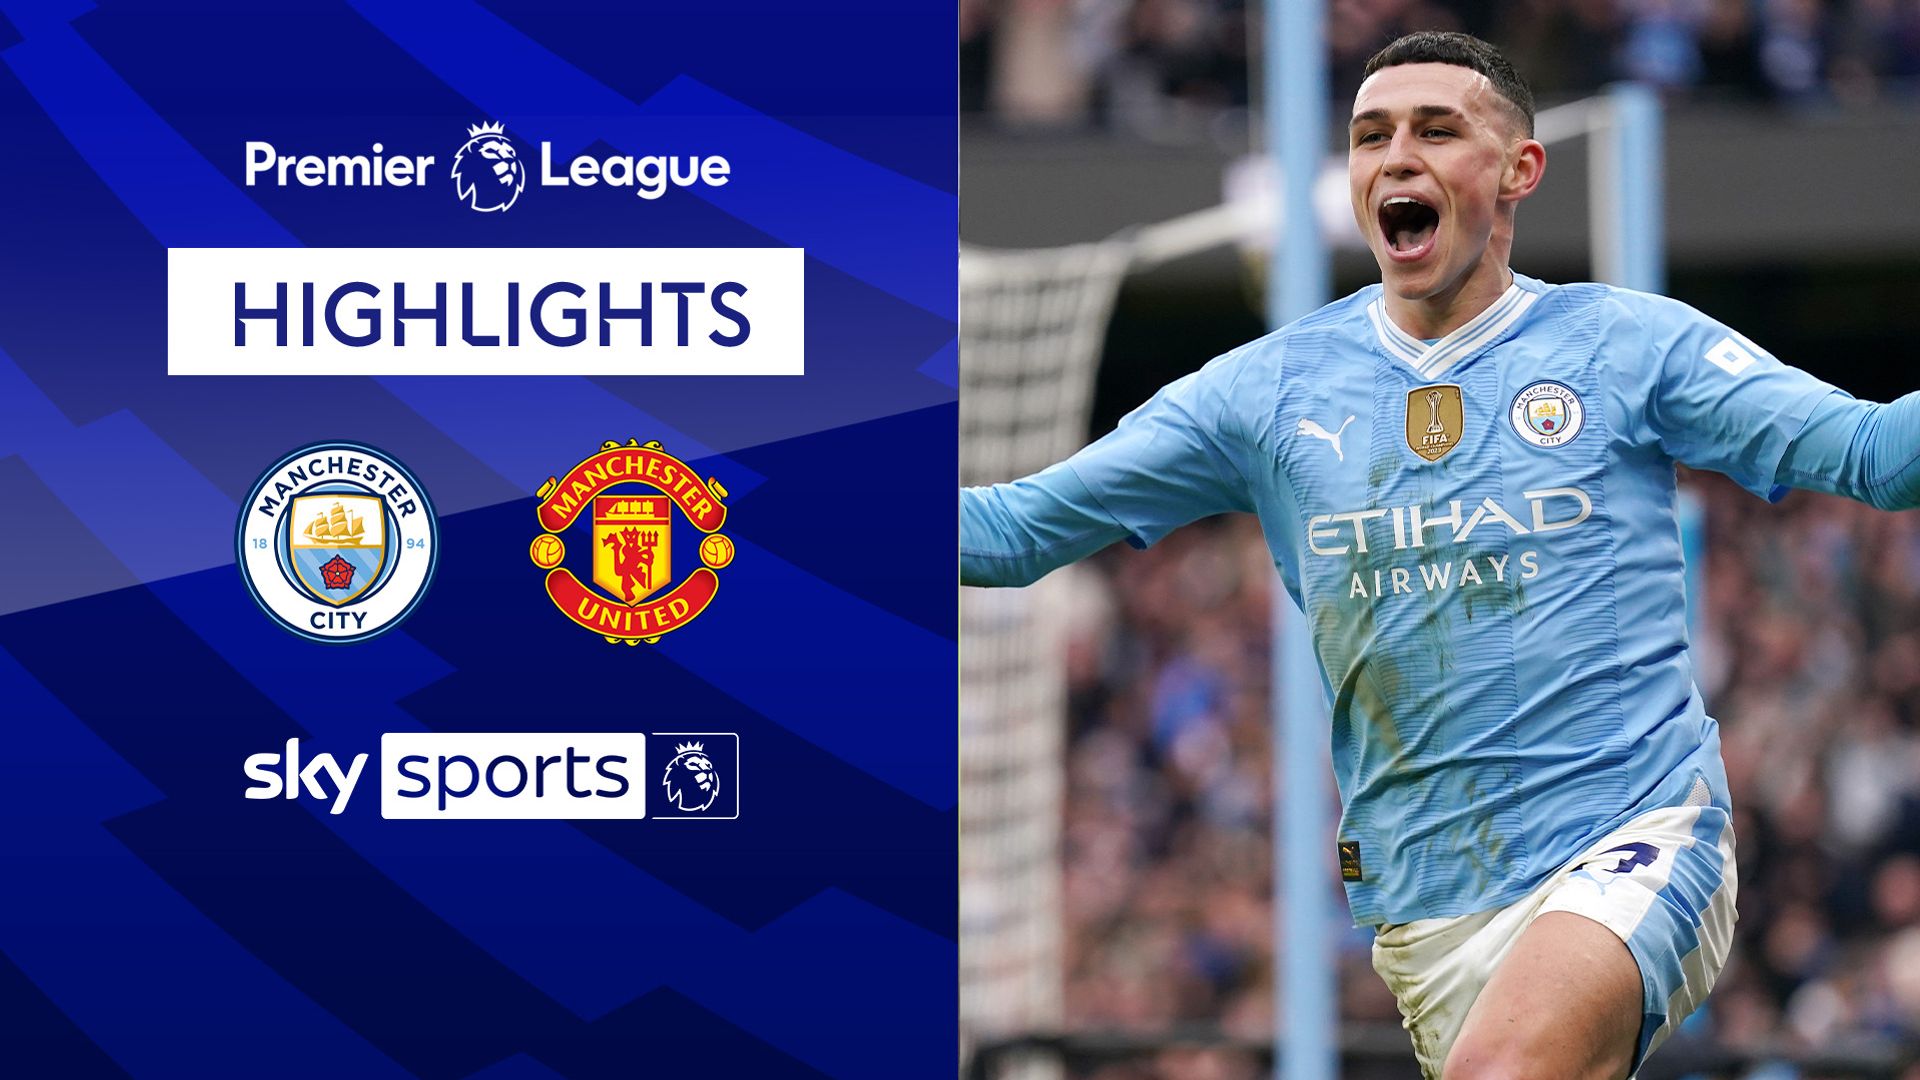 City fight back to claim Manchester derby victory